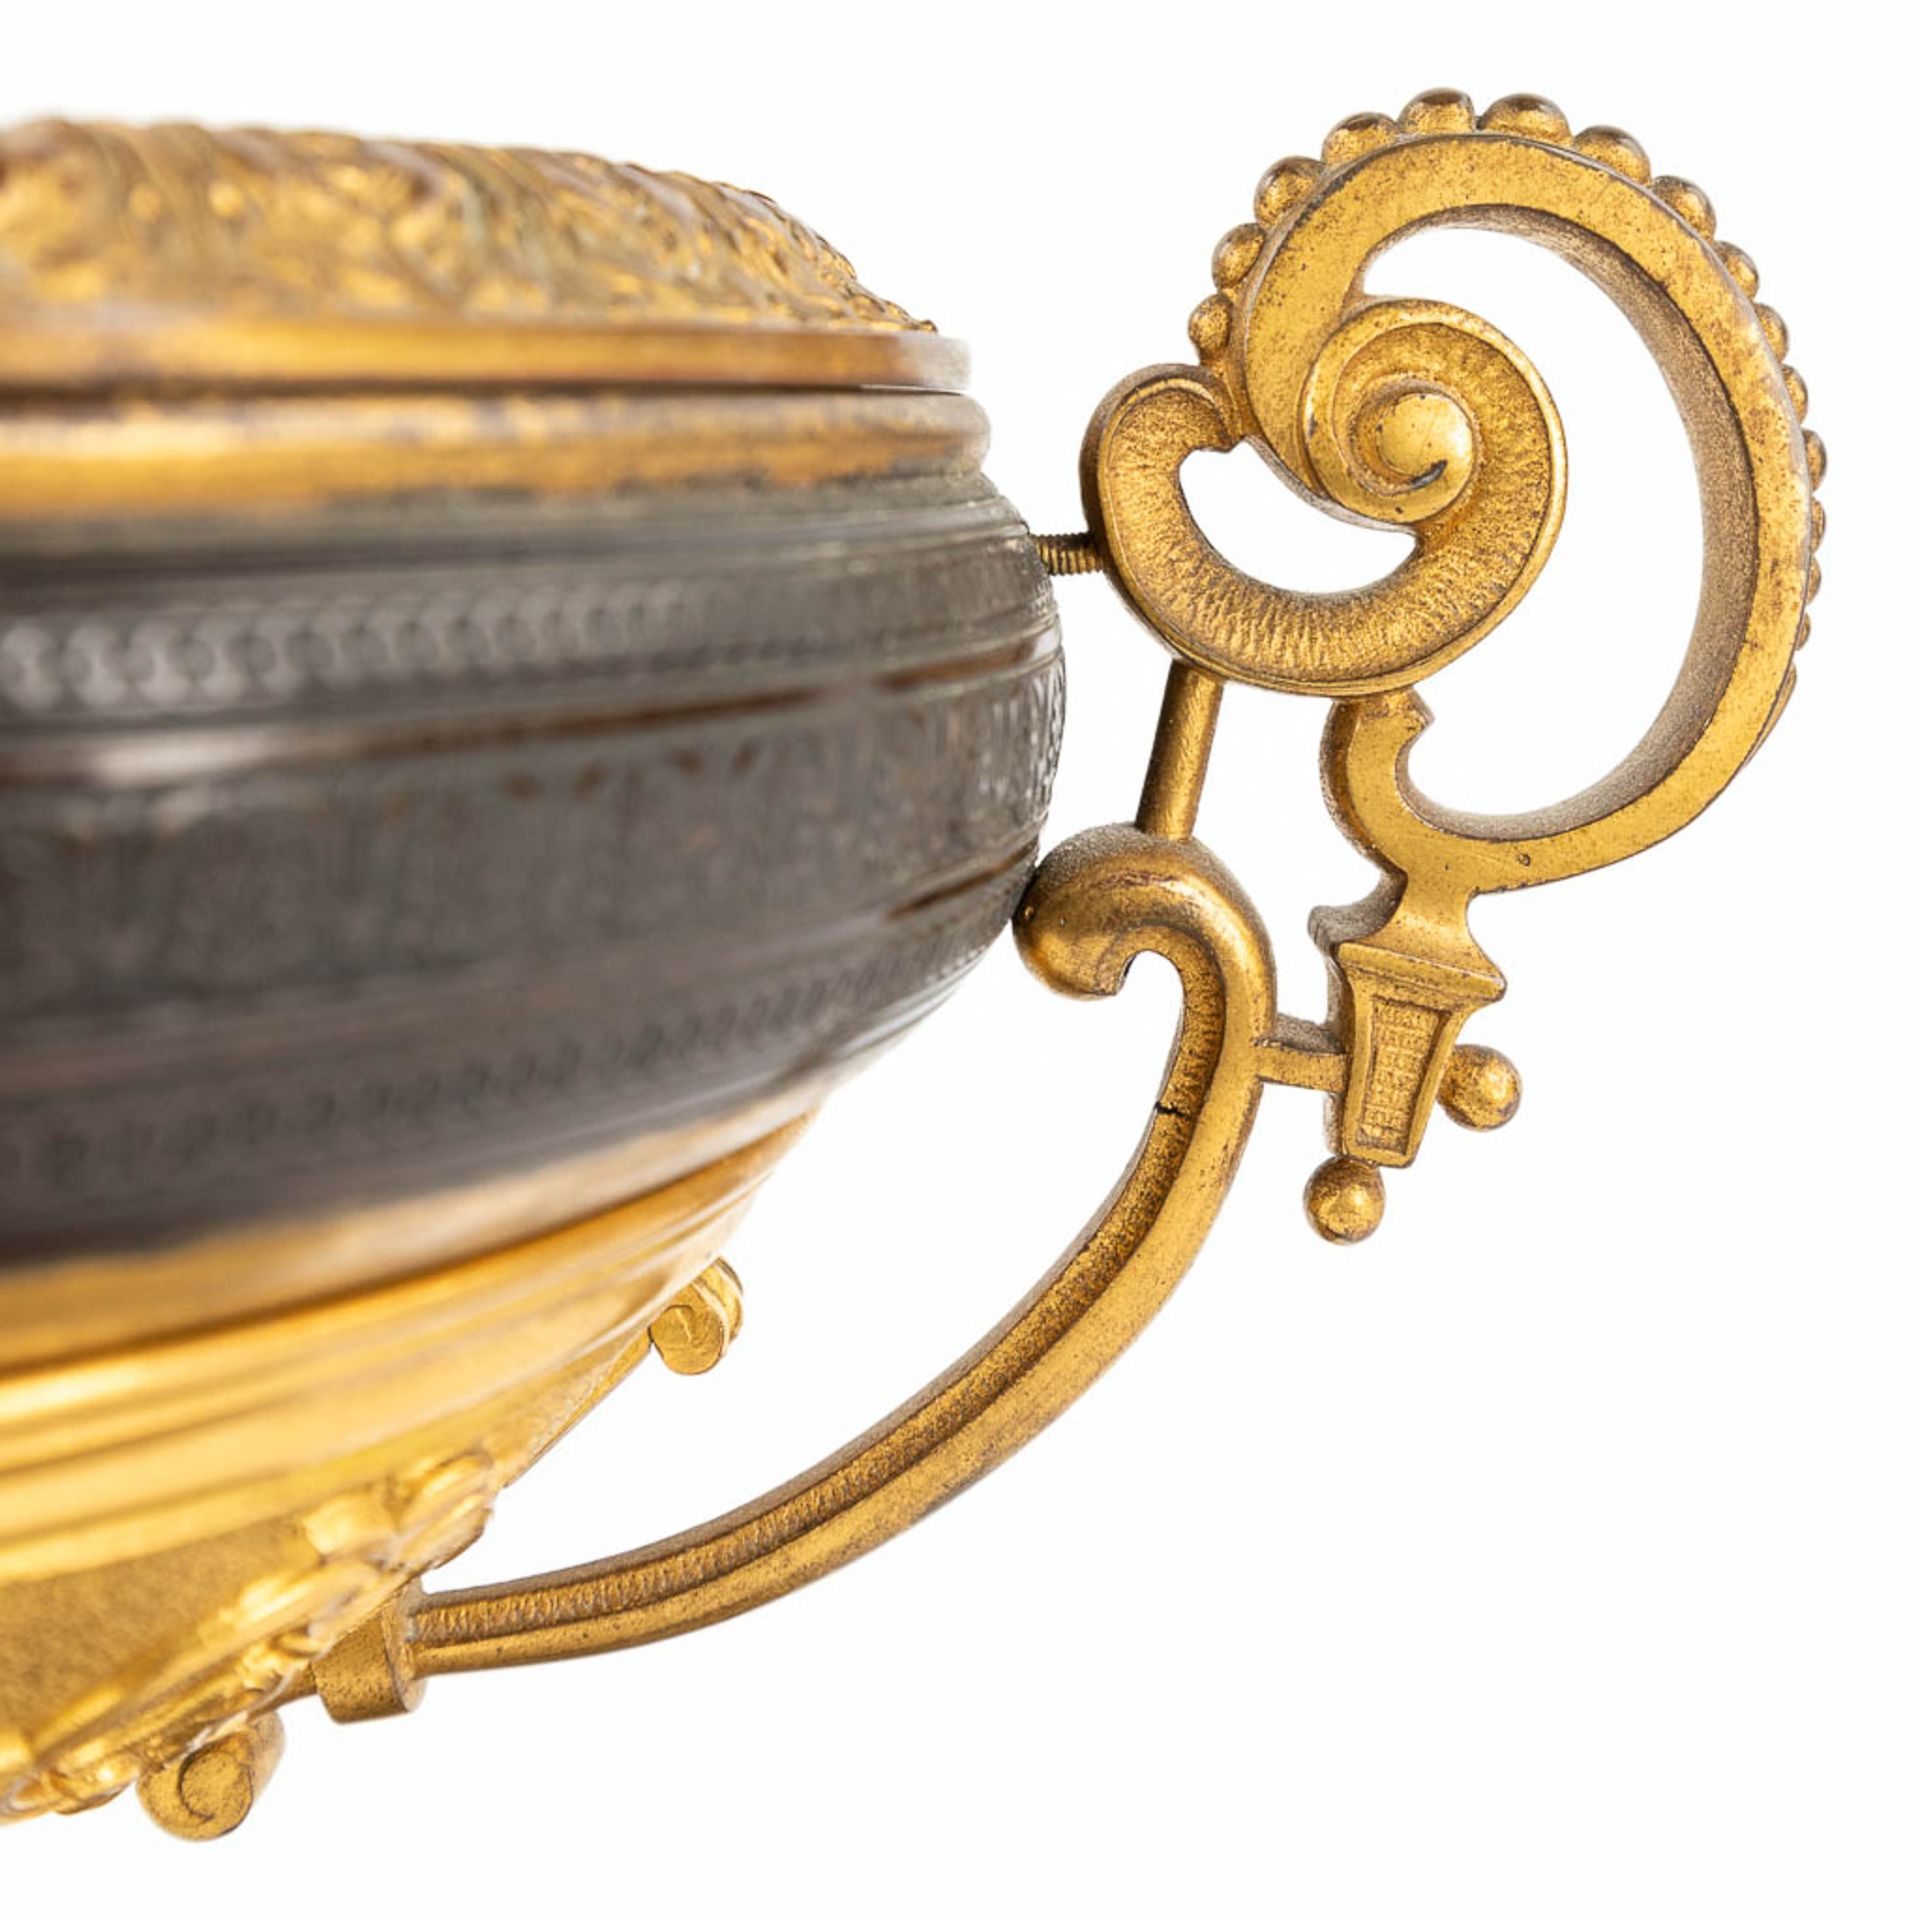 An antique trophy, made of gilt and patinated bronze. 19th C. (L: 16 x W: 22 x H: 27 cm) - Image 14 of 14